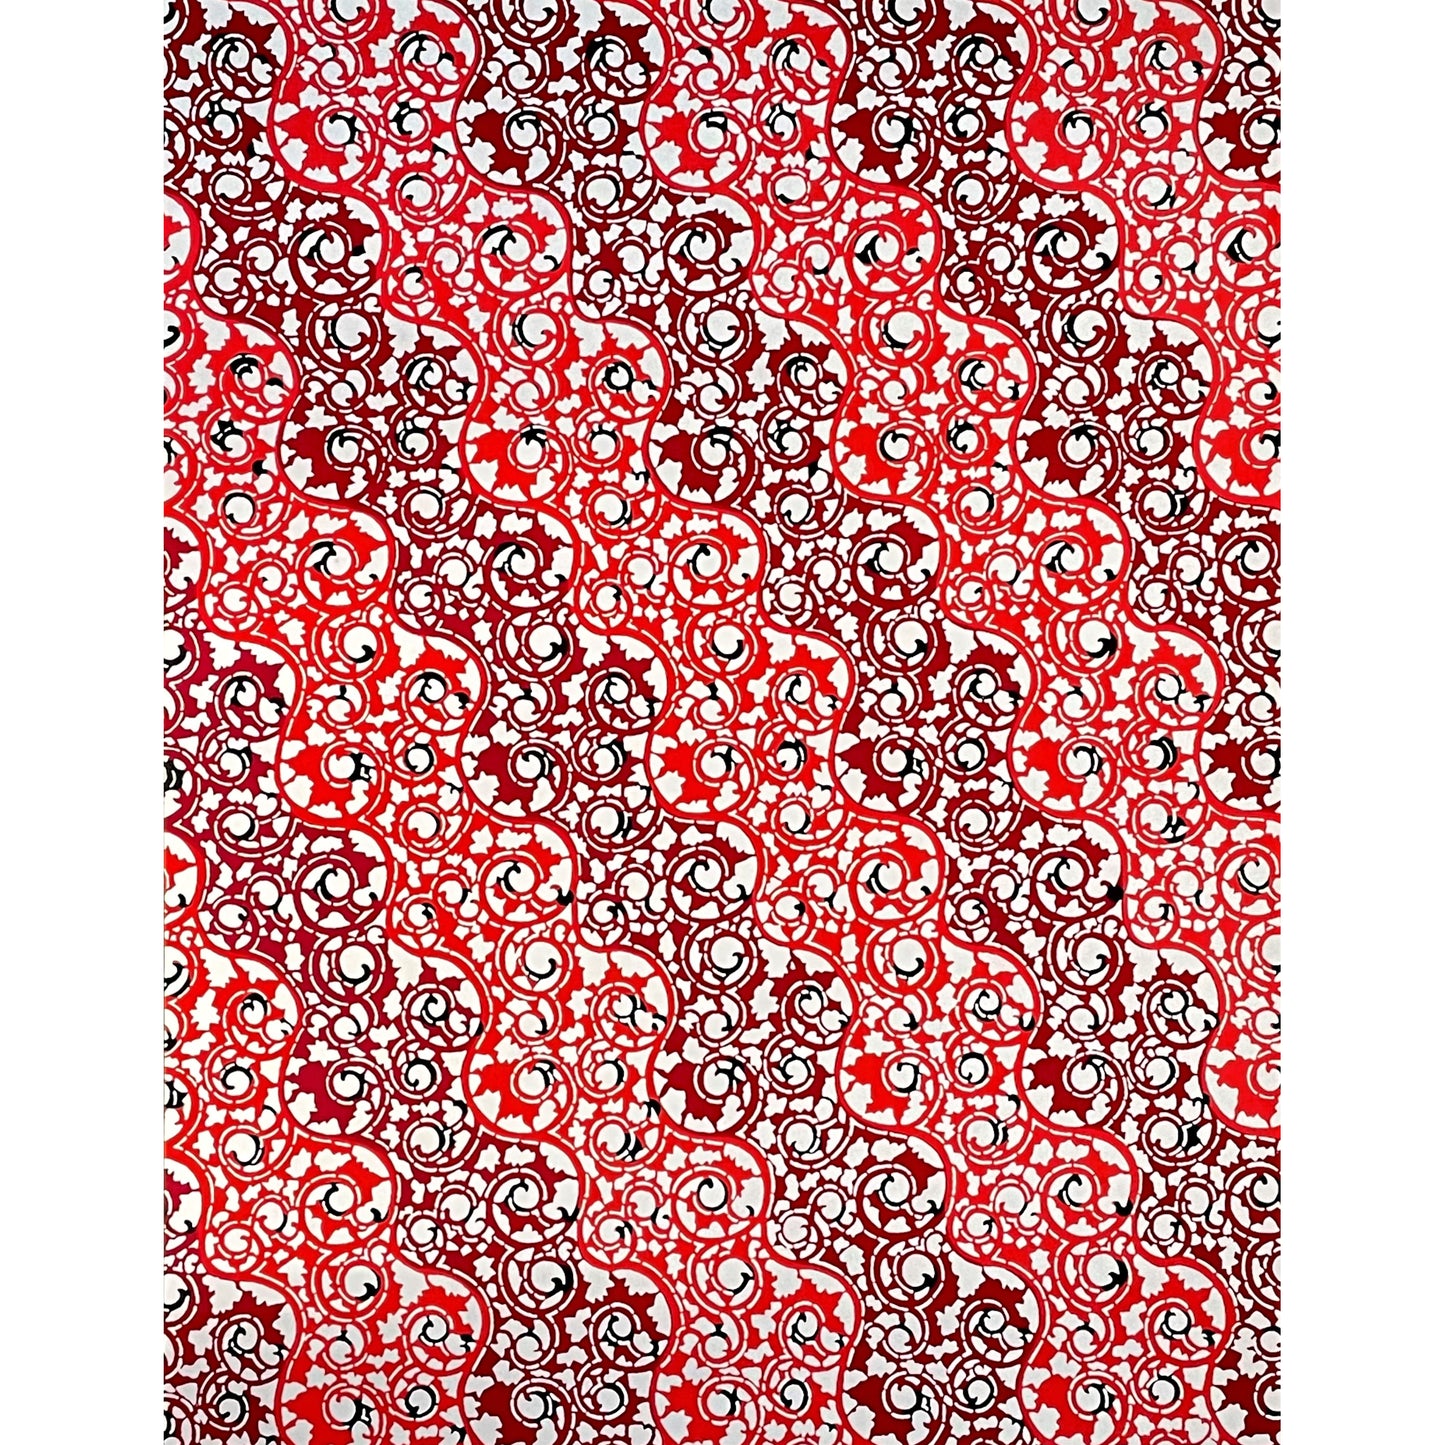 japanese stencil-dyed handmade paper with traditional arabesque vine pattern in red and maroon, full size sheet